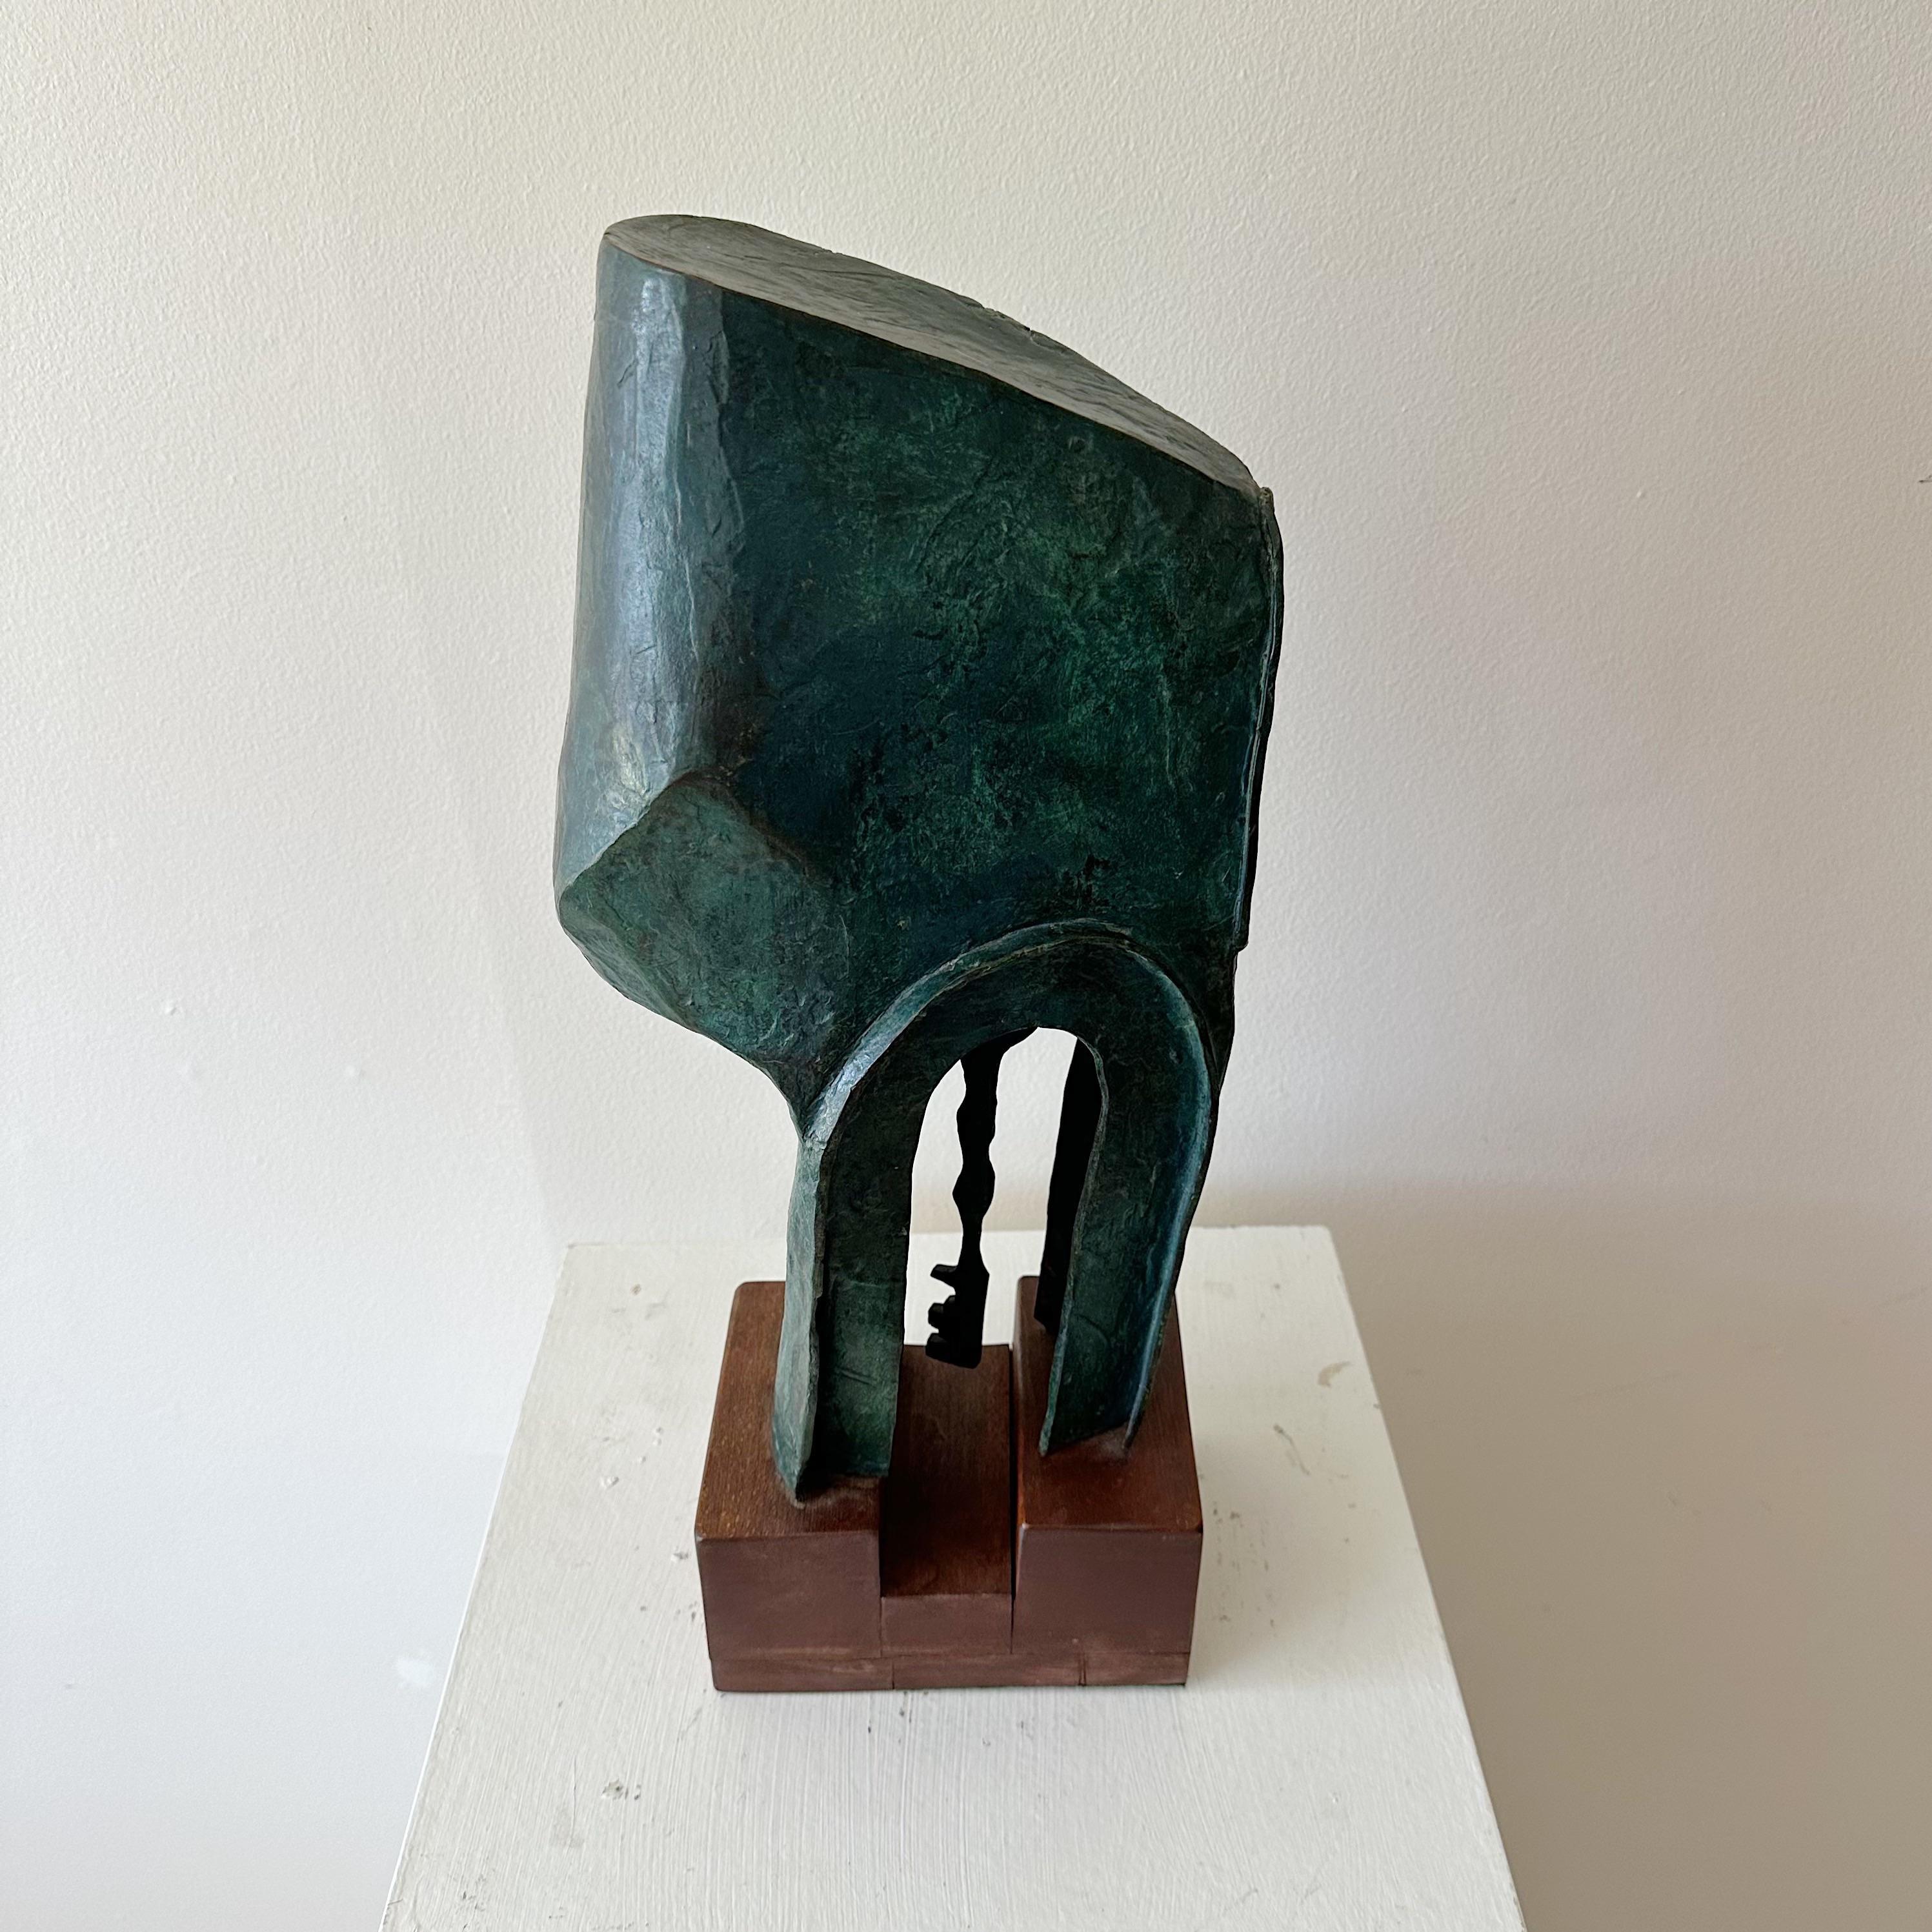 Abstract Patinated Bronze Sculpture on Wood Base with Hanging Keys

This exquisite and thought-provoking sculpture is a striking blend of abstract artistry and intriguing symbolism. Crafted from patinated bronze, the sculpture rests elegantly atop a